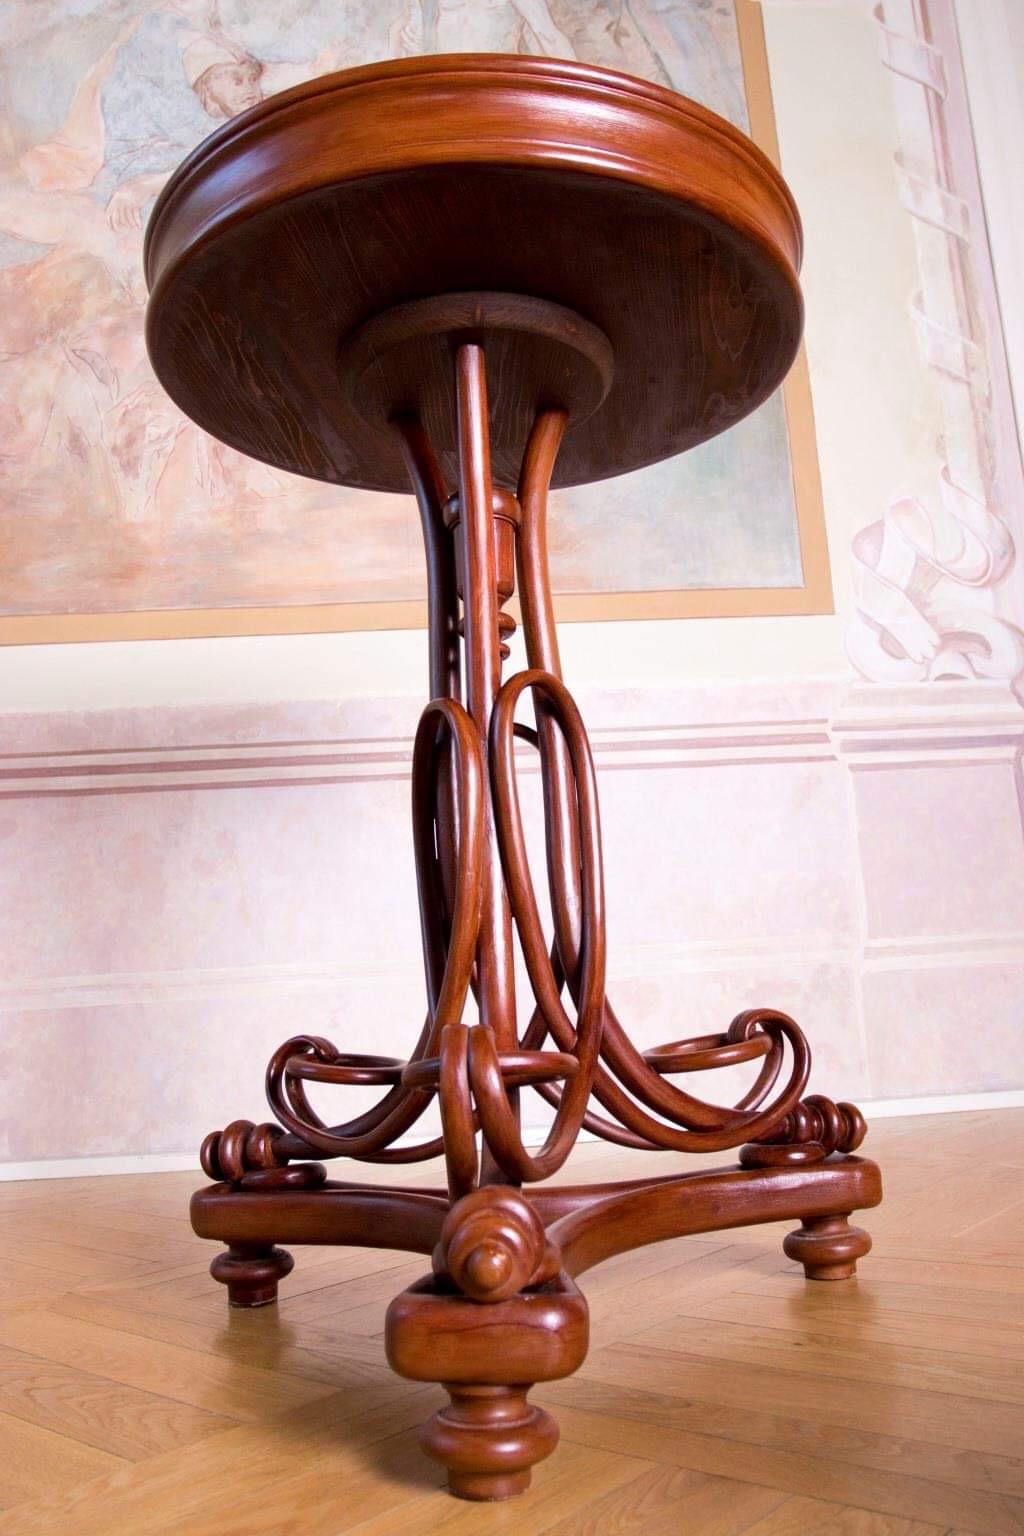 This flowerpot table is a real treasure, beautiful Wien Secession line. It could be the décor of the apartment.